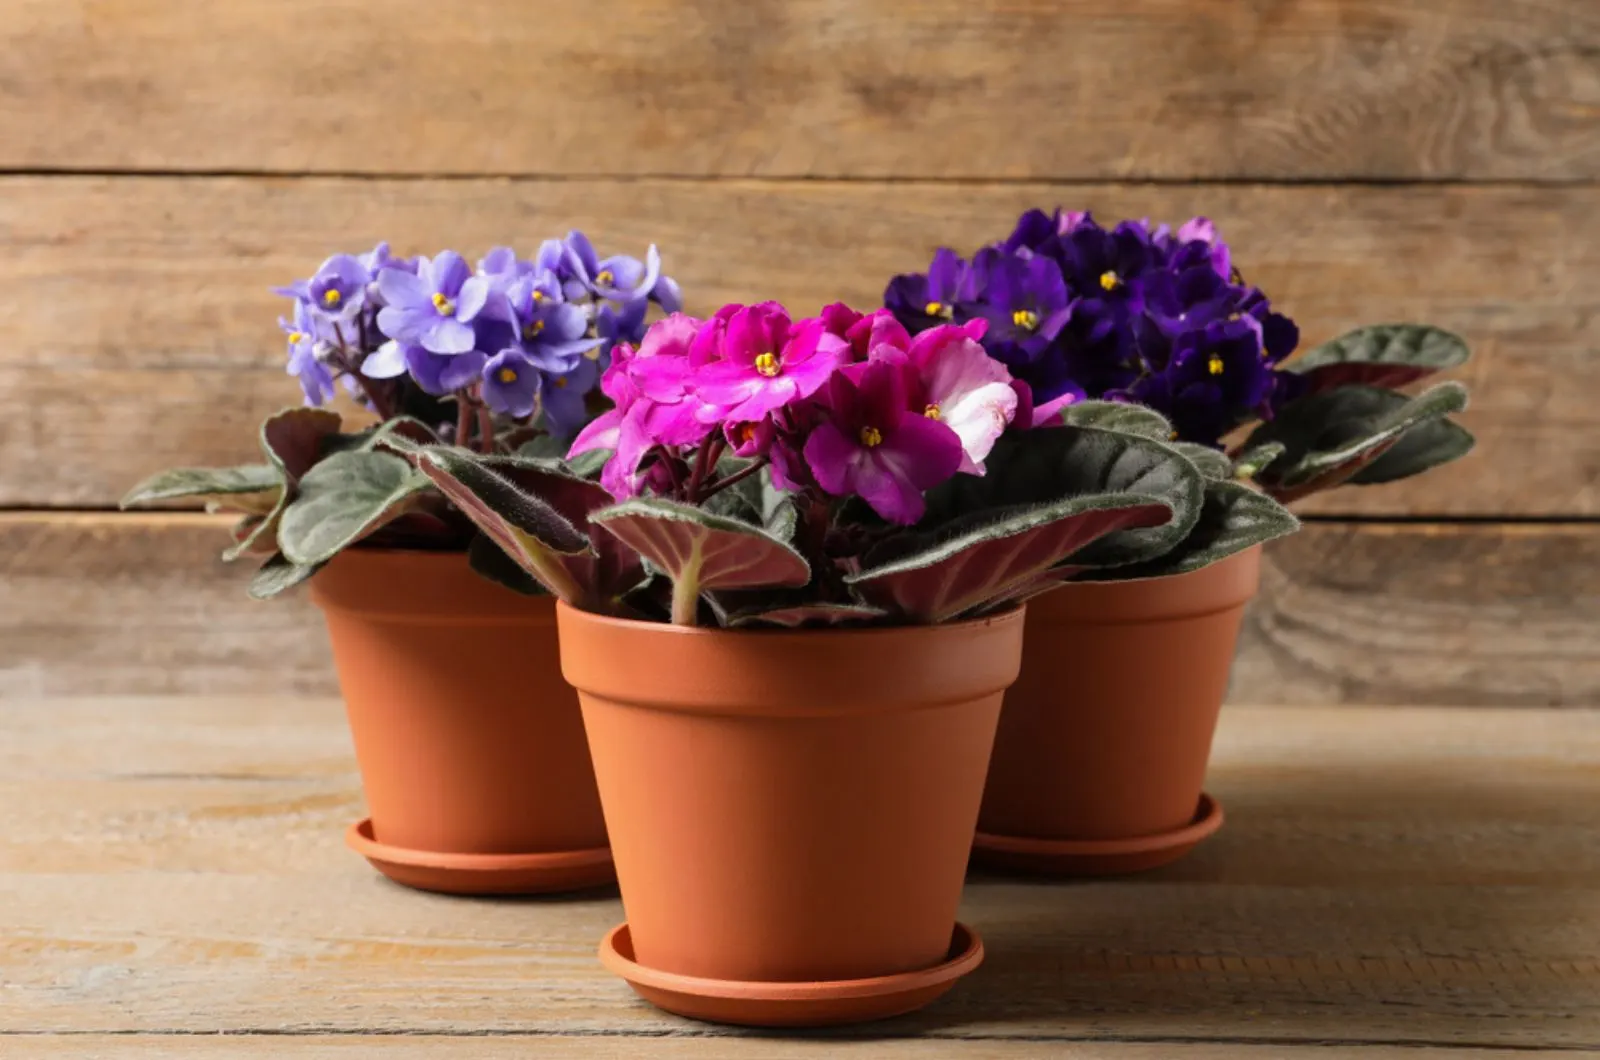 11 Simple Steps For Repotting African Violets For More Blossoms